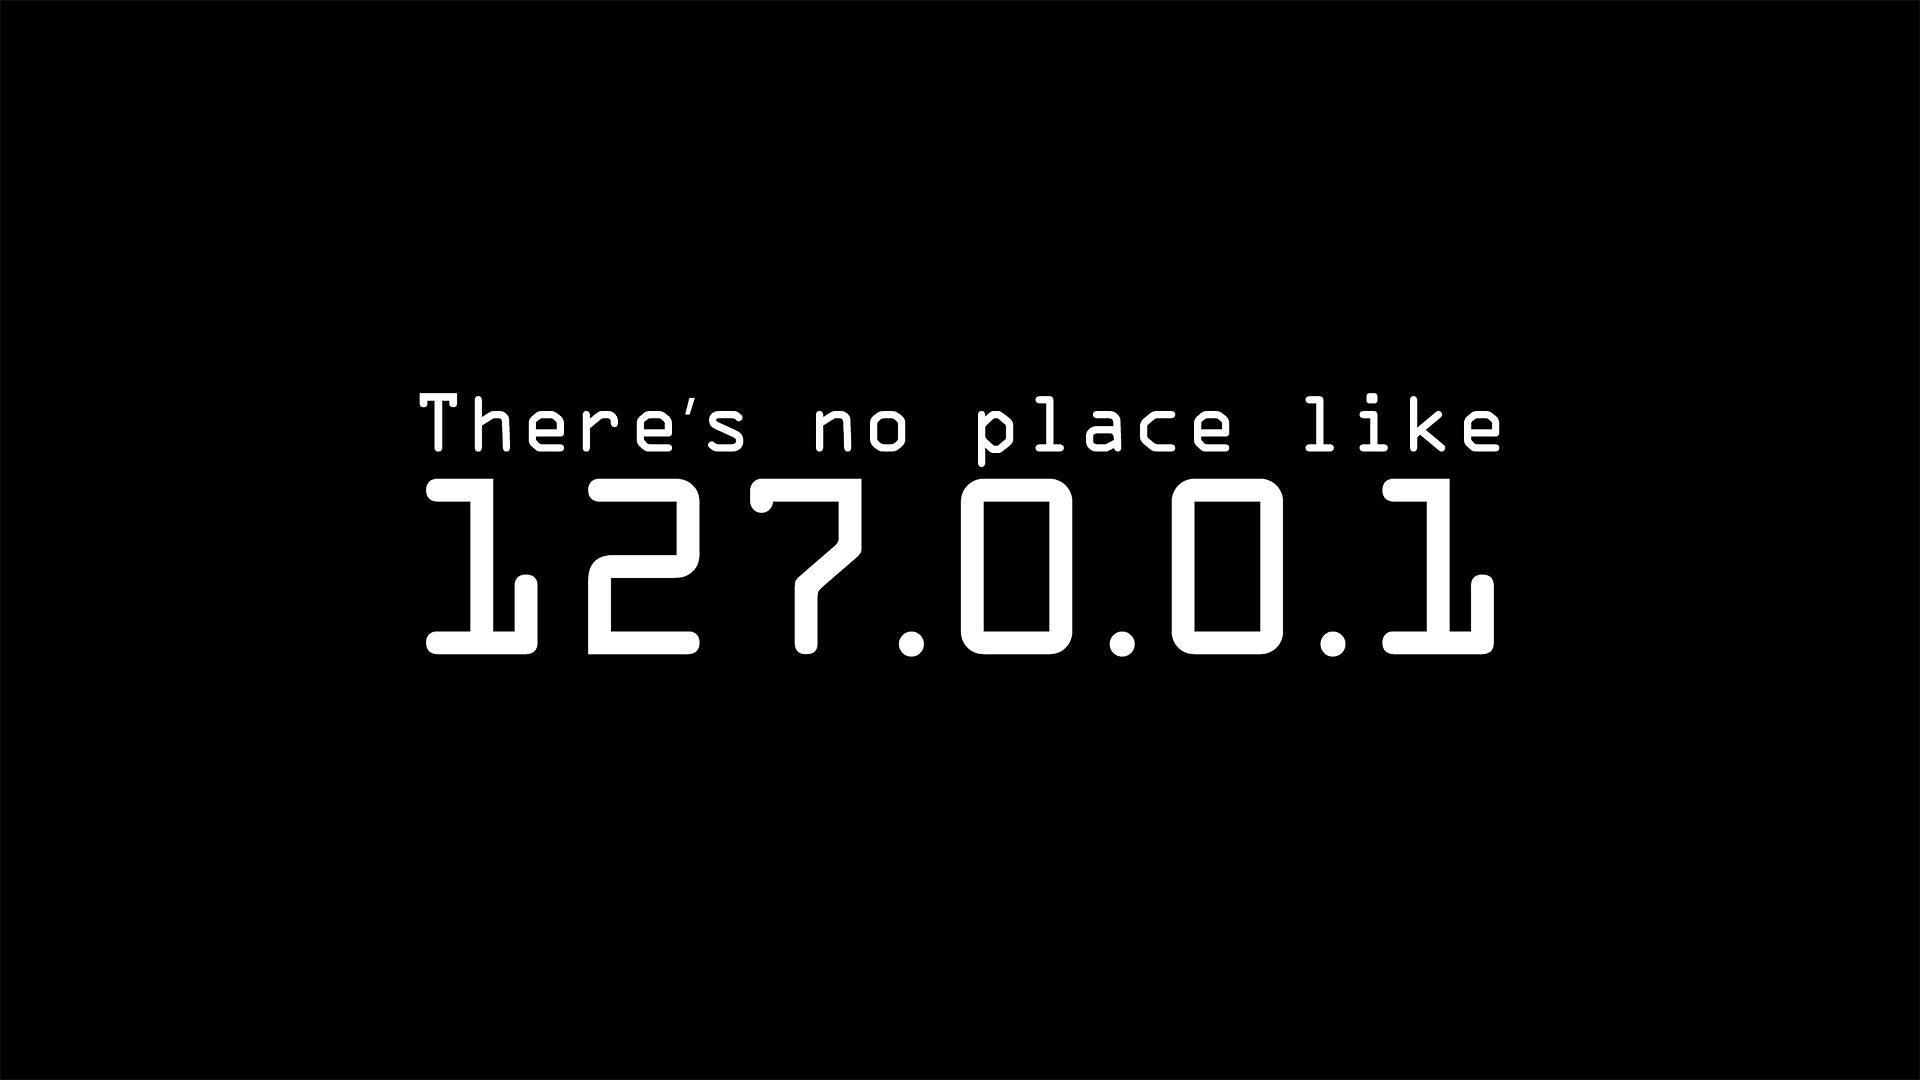 There's no place like 127.0.0.1 HD Wallpaper FullHDWpp HD